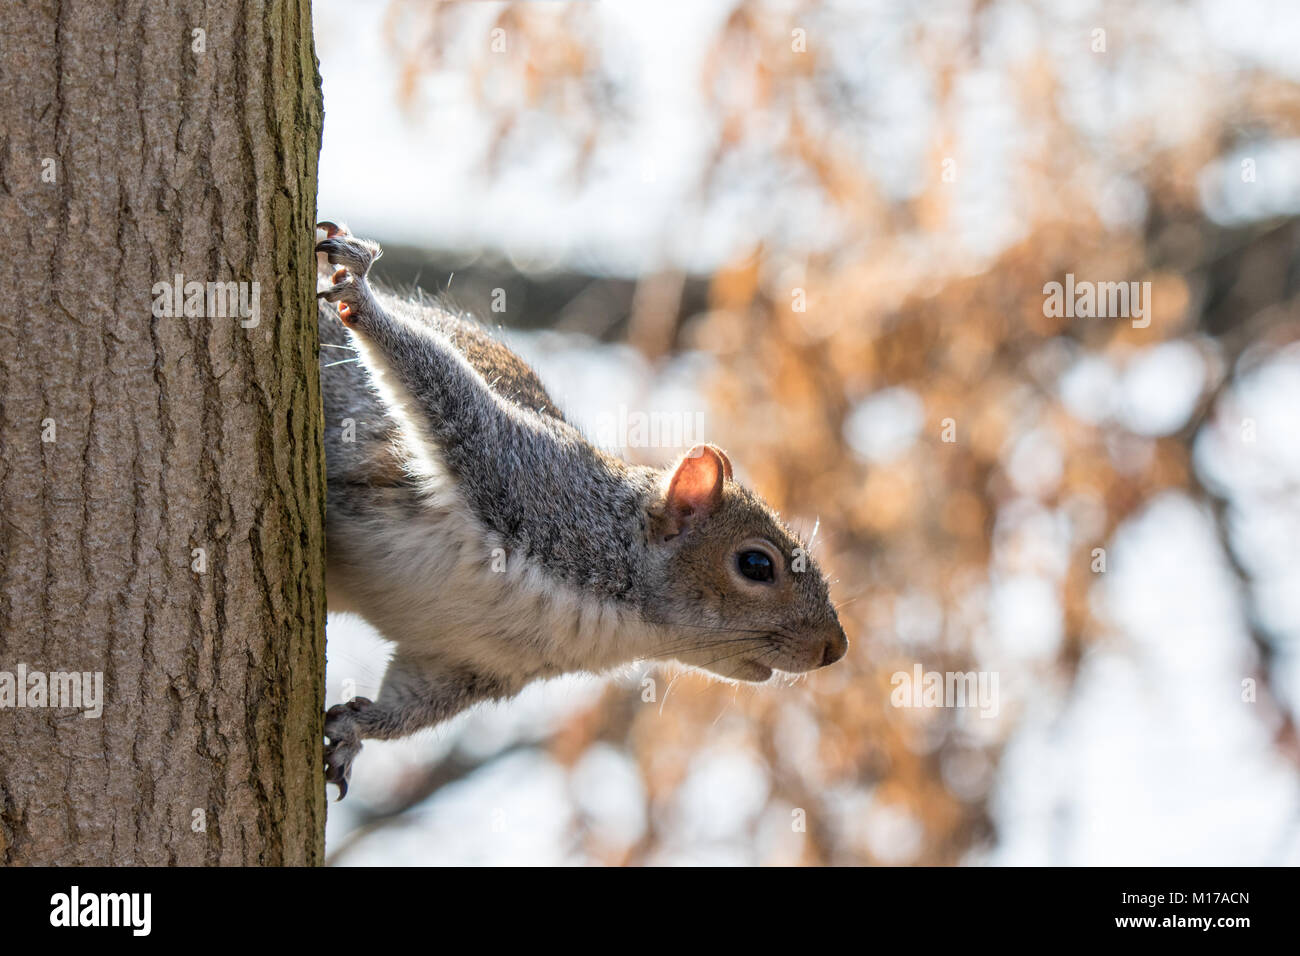 Grey squirrel on side of tree trunk about to jump. Close up in frame Stock Photo